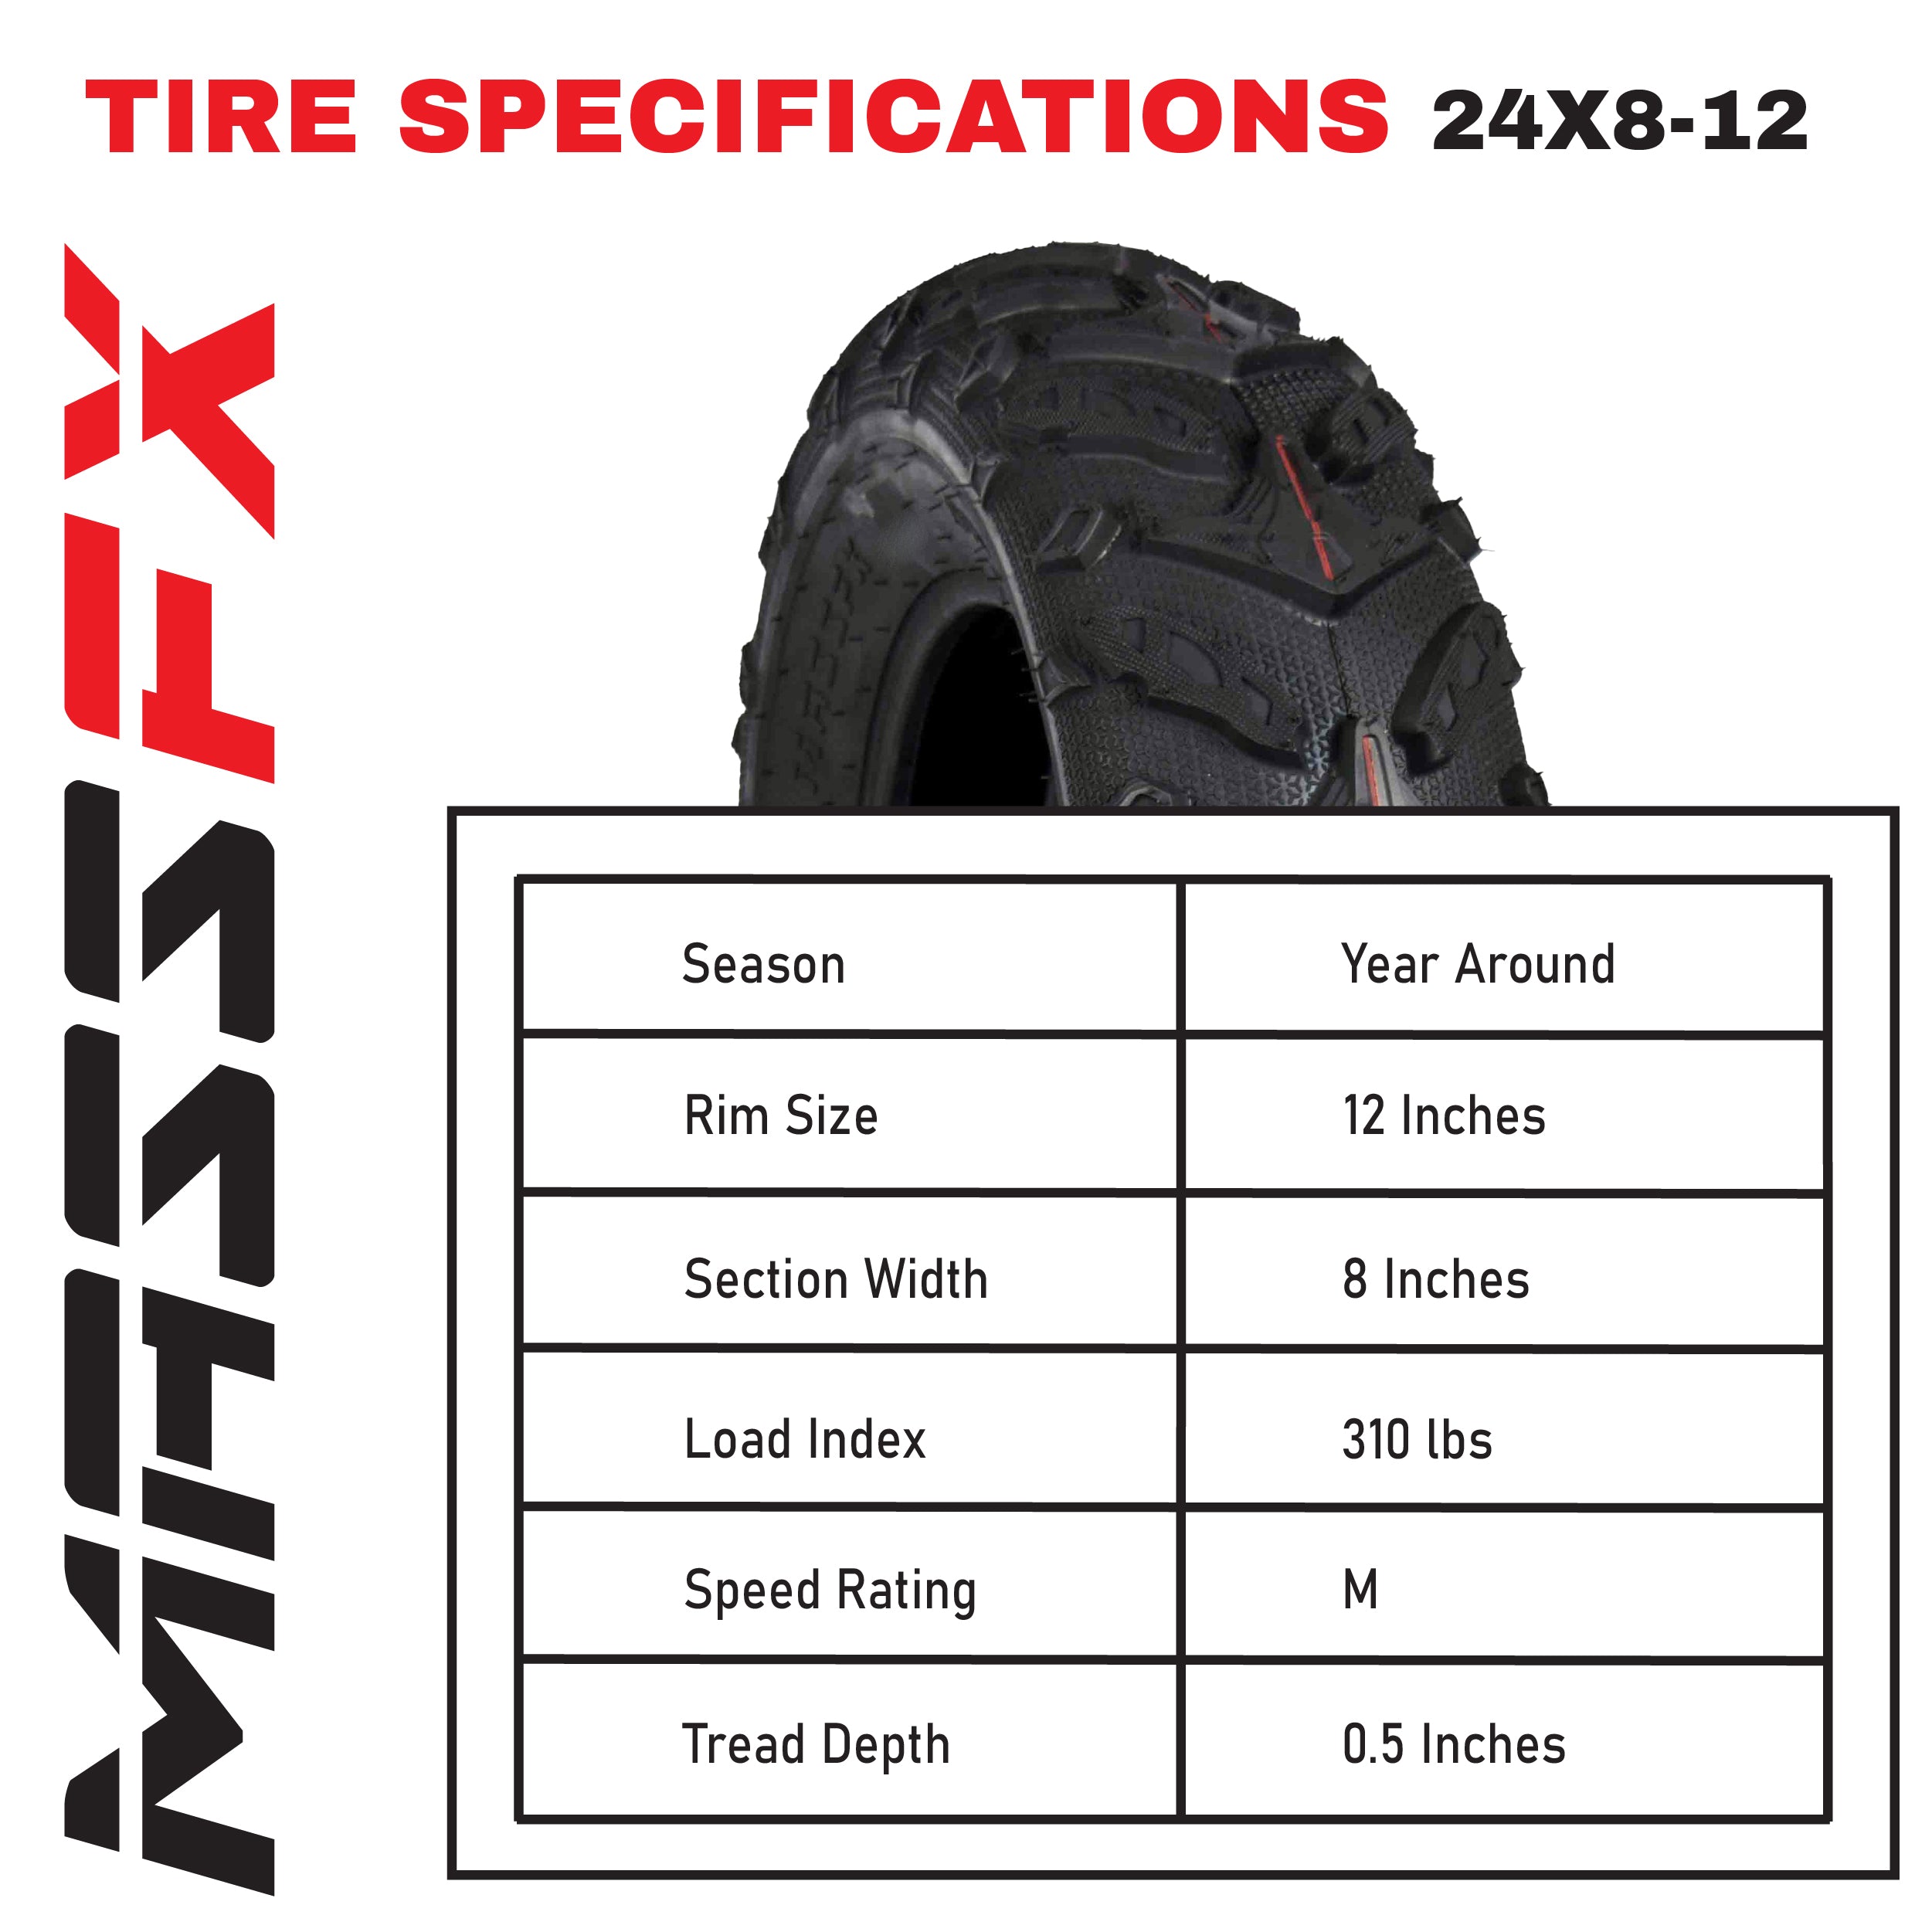 MASSFX Grinder 24x8-12 Front ATV Tire 6 Ply for Soft/Hard Pack Ground (2 Pack)